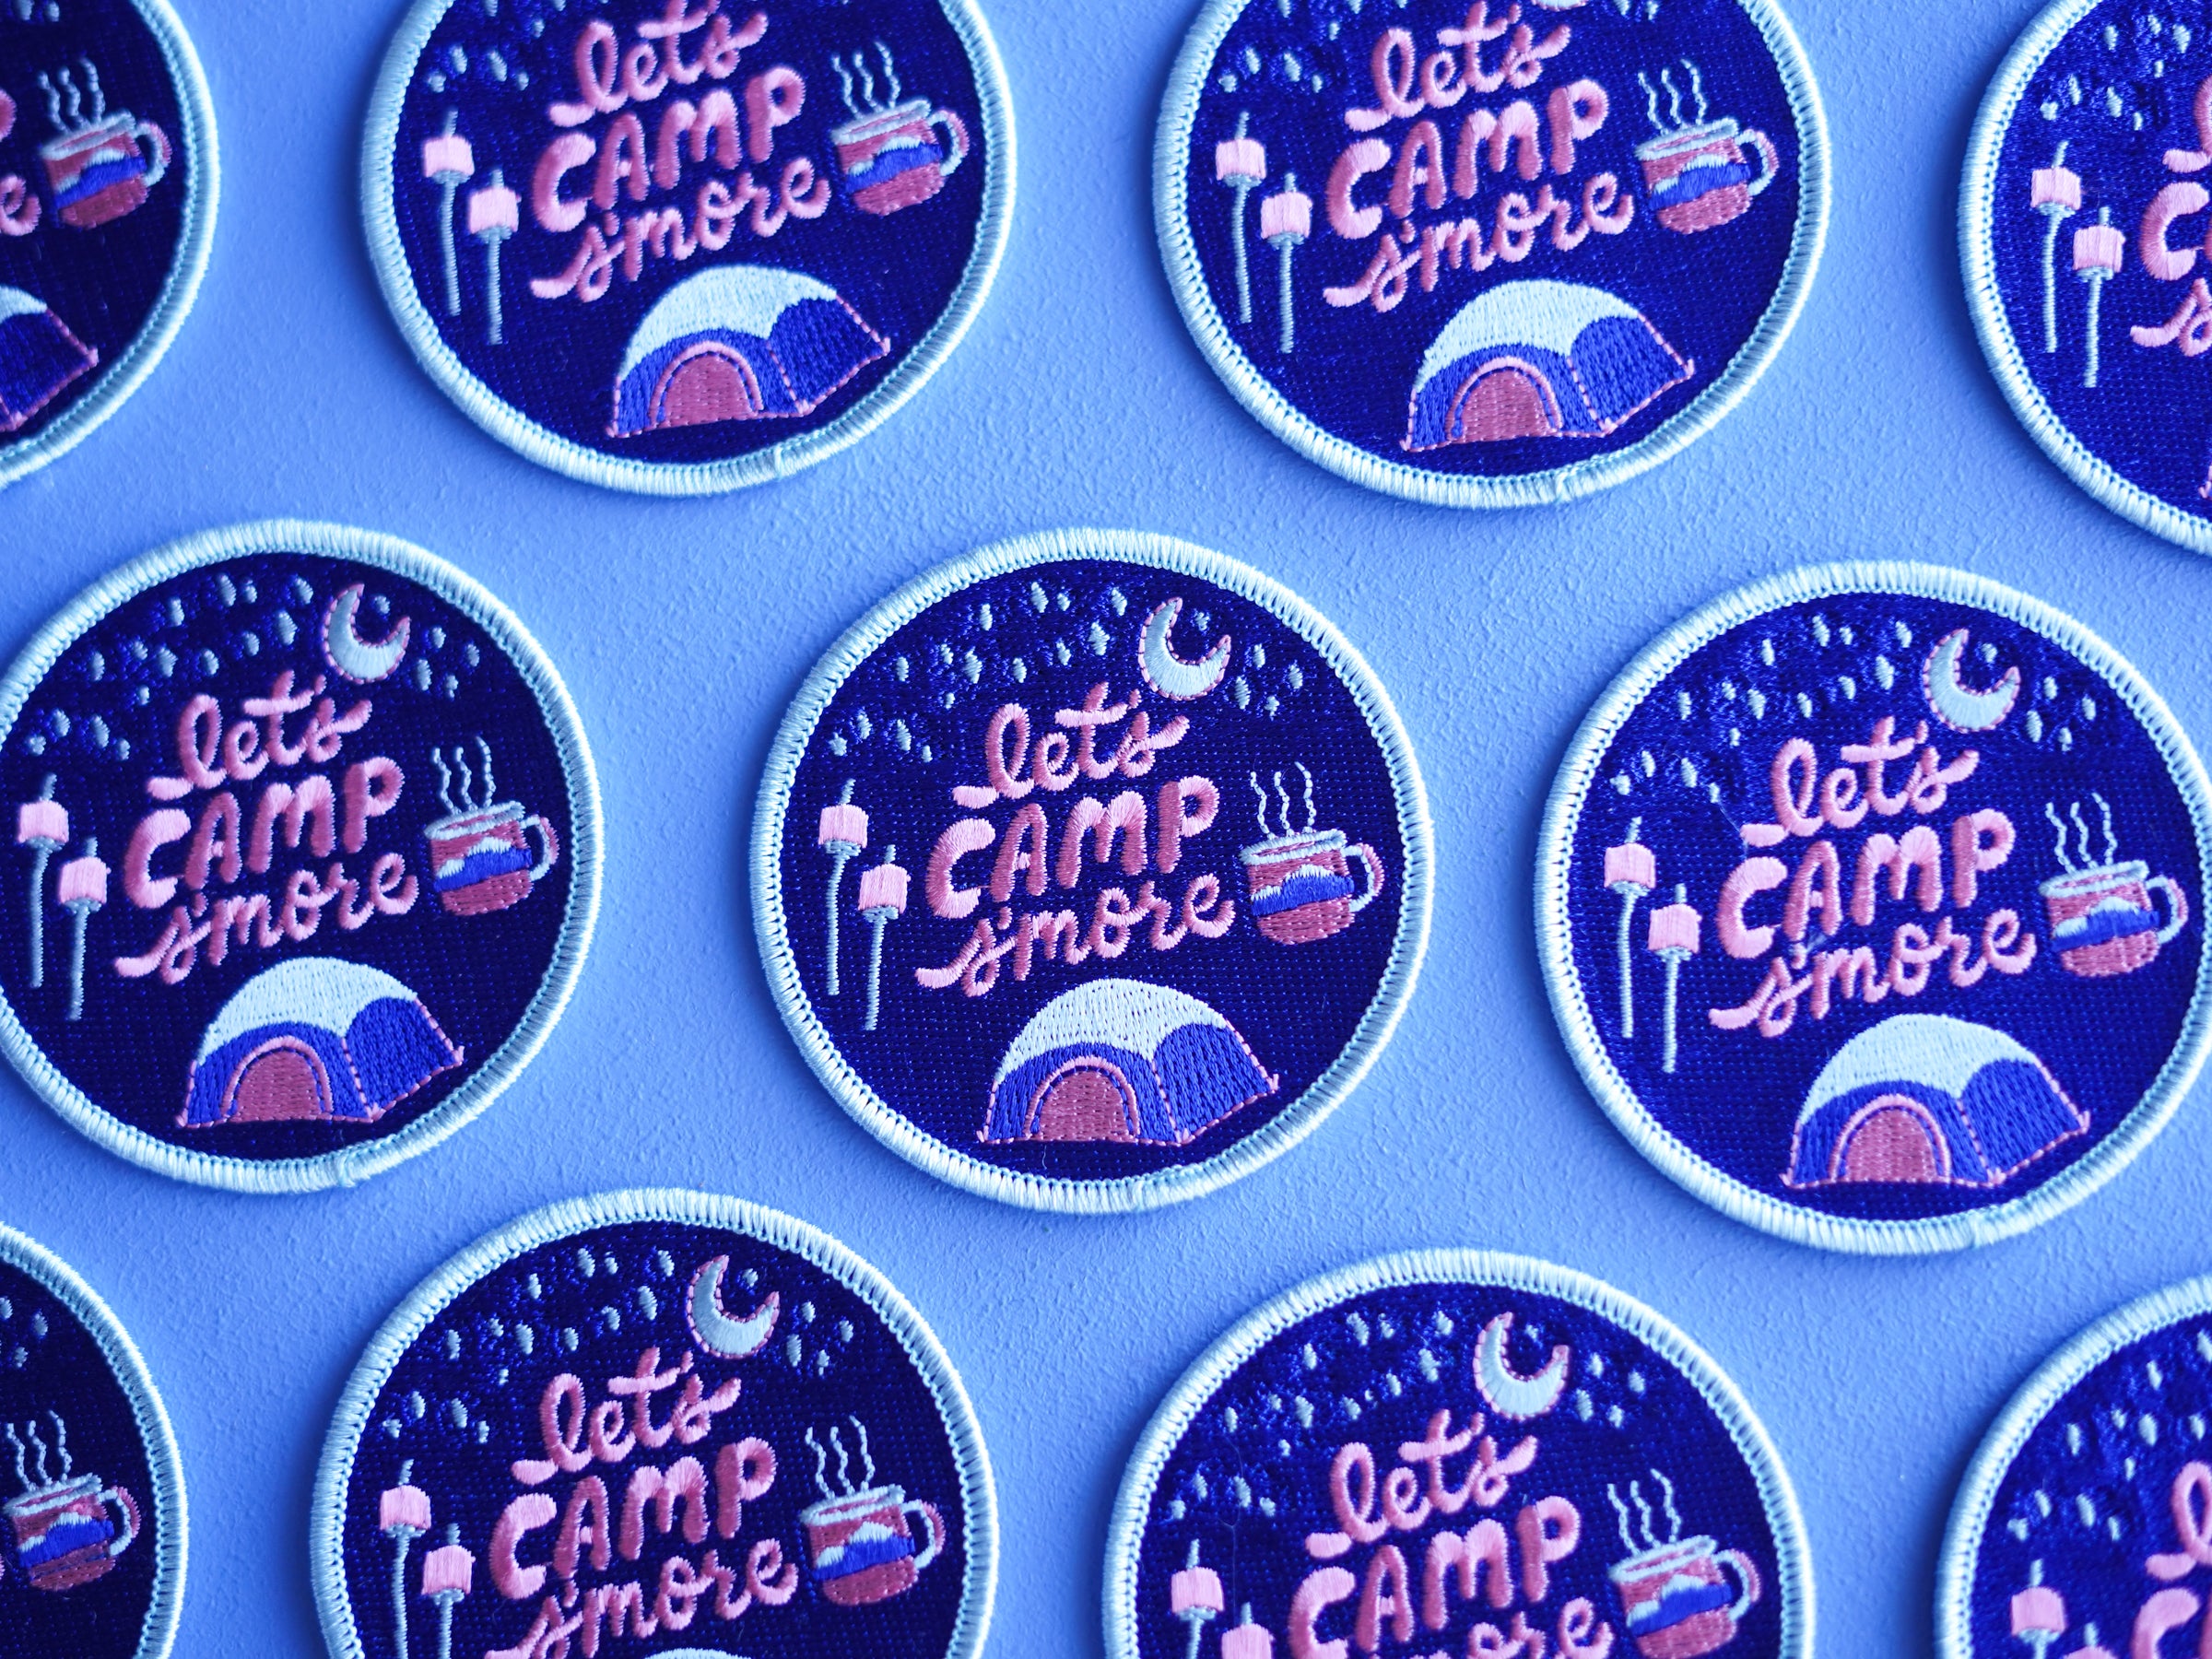 Let’s Camp S’more Embroidered Patch